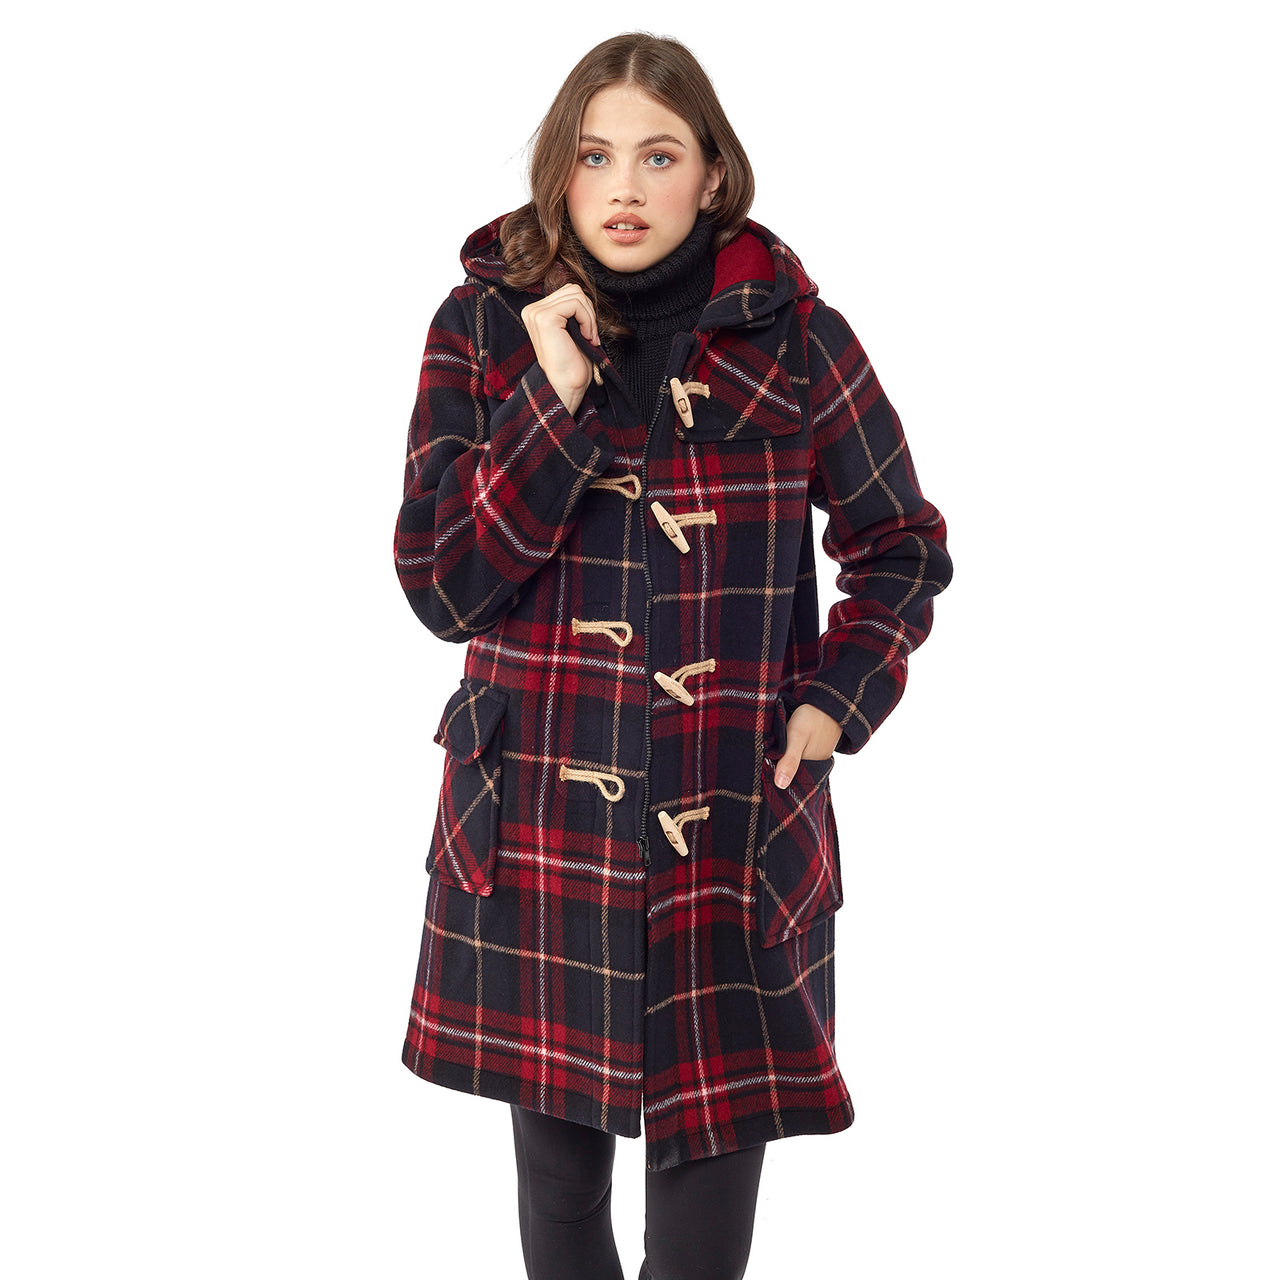 Women's Burgundy Check Original Classic Fit Duffle Coat with Wooden Toggles